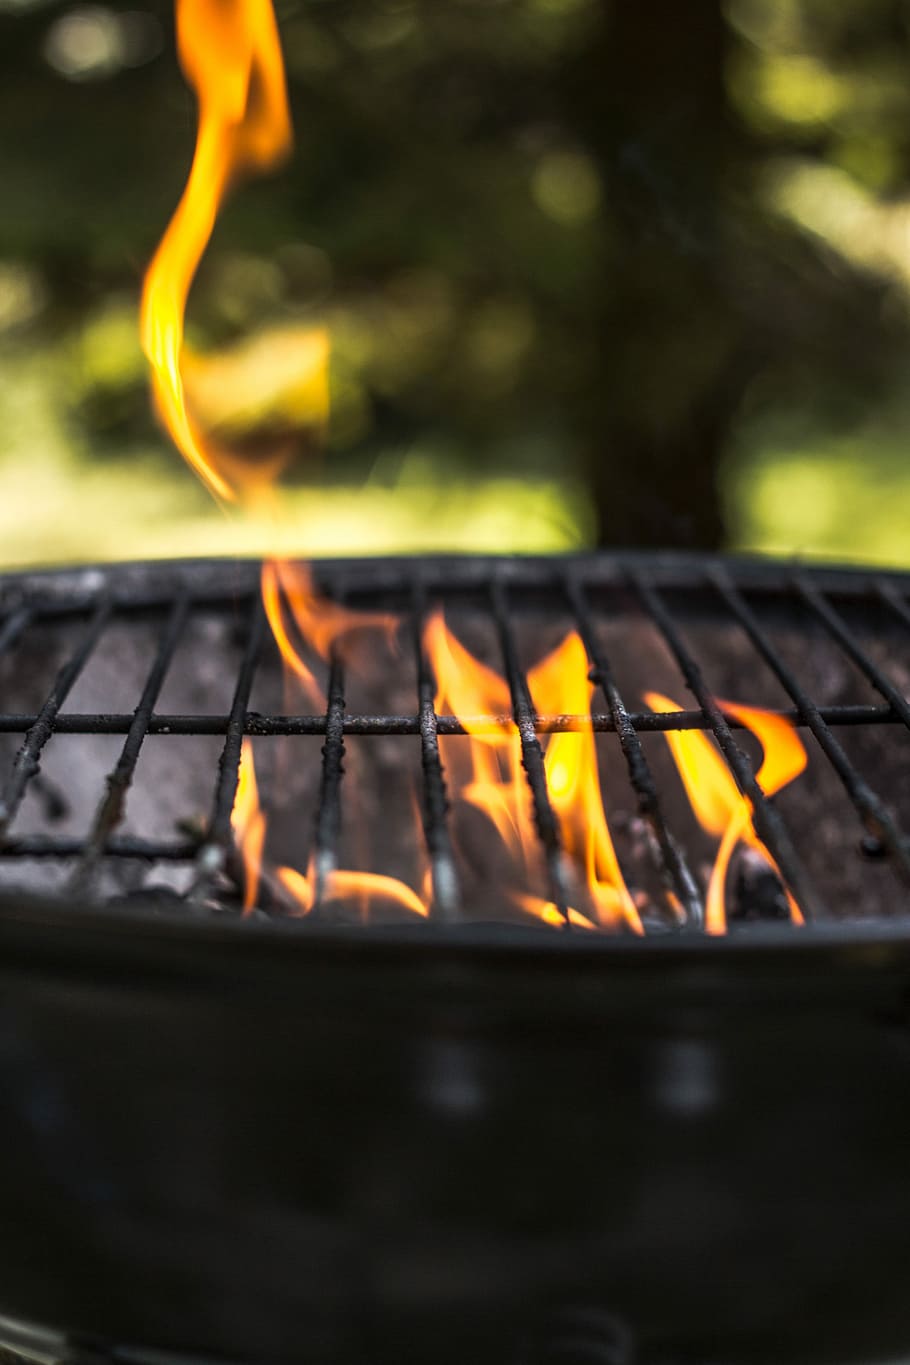 Grill, Season, Fire, season on the grill, empty grill, grilling, get fire to burn, kindling, coal, hot